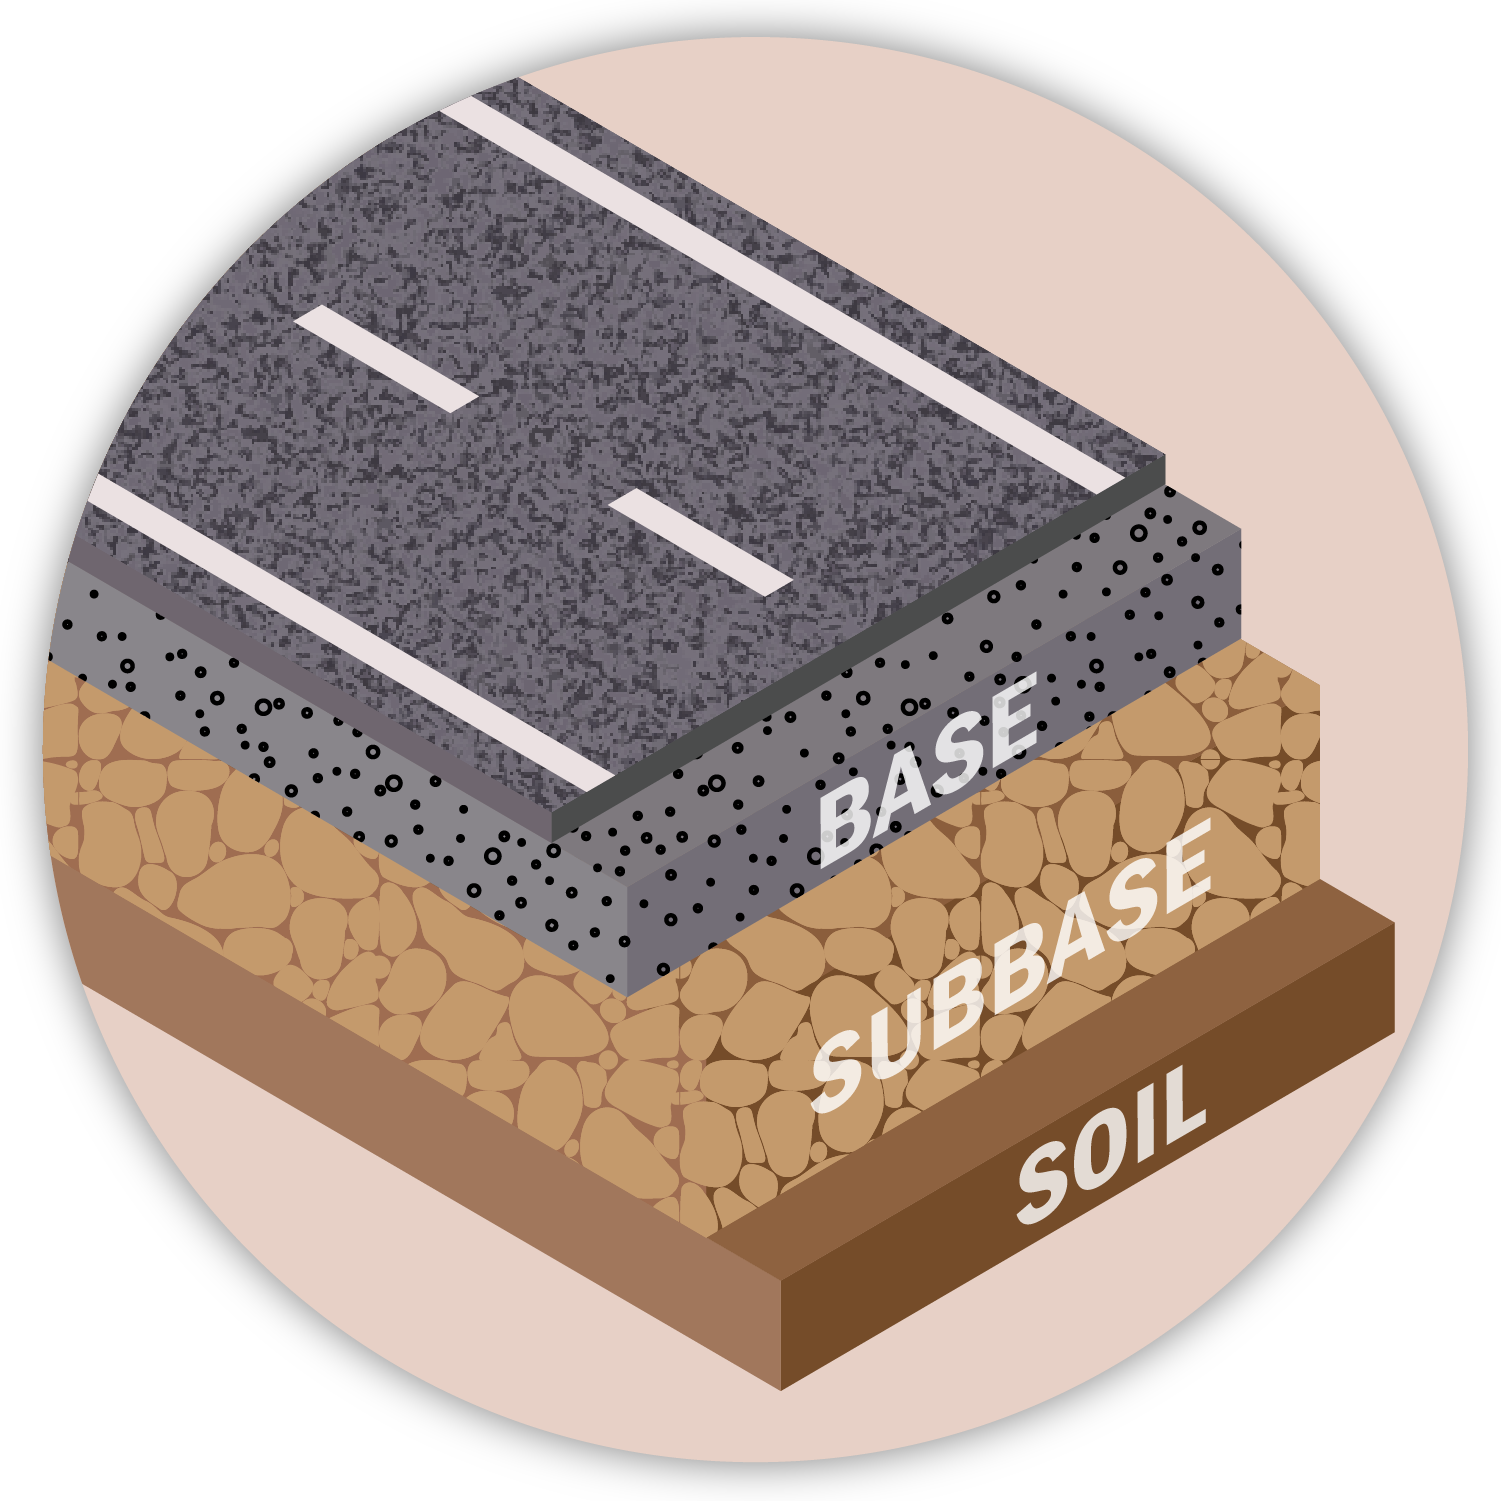 Pavement cross-section with base, subbase, and soil labelled.